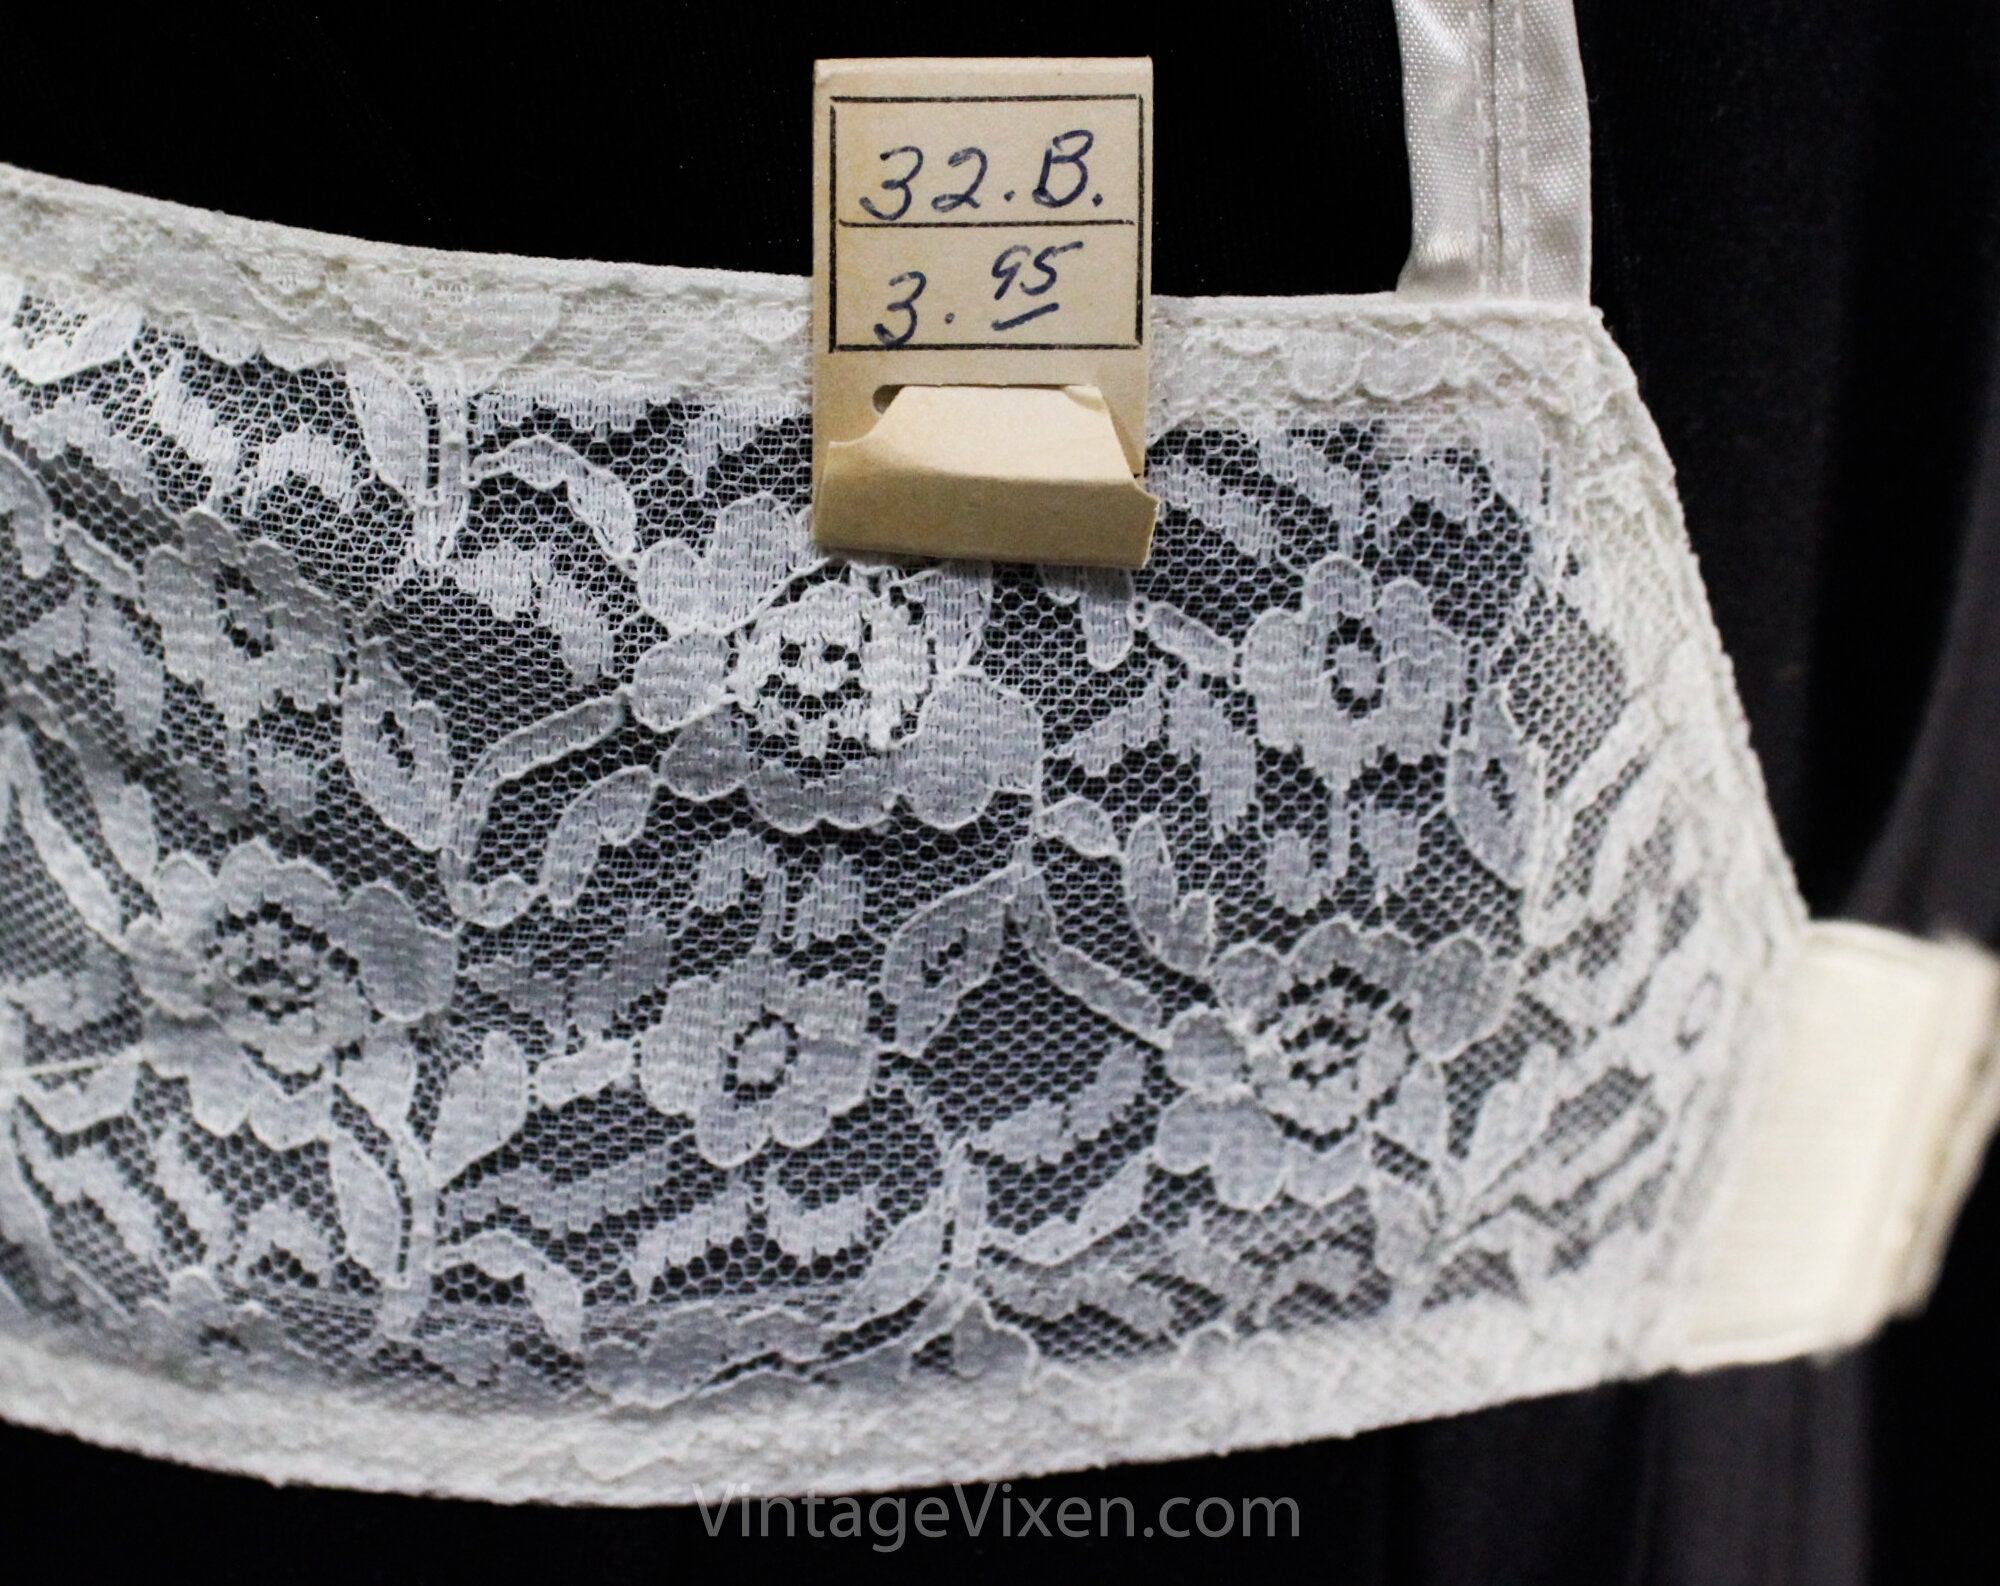 Vintage 1940's Bullet Bra. Off White Spider Web Cotton Bra. Exquisite Form,  Stand Out Bra, Size 32B